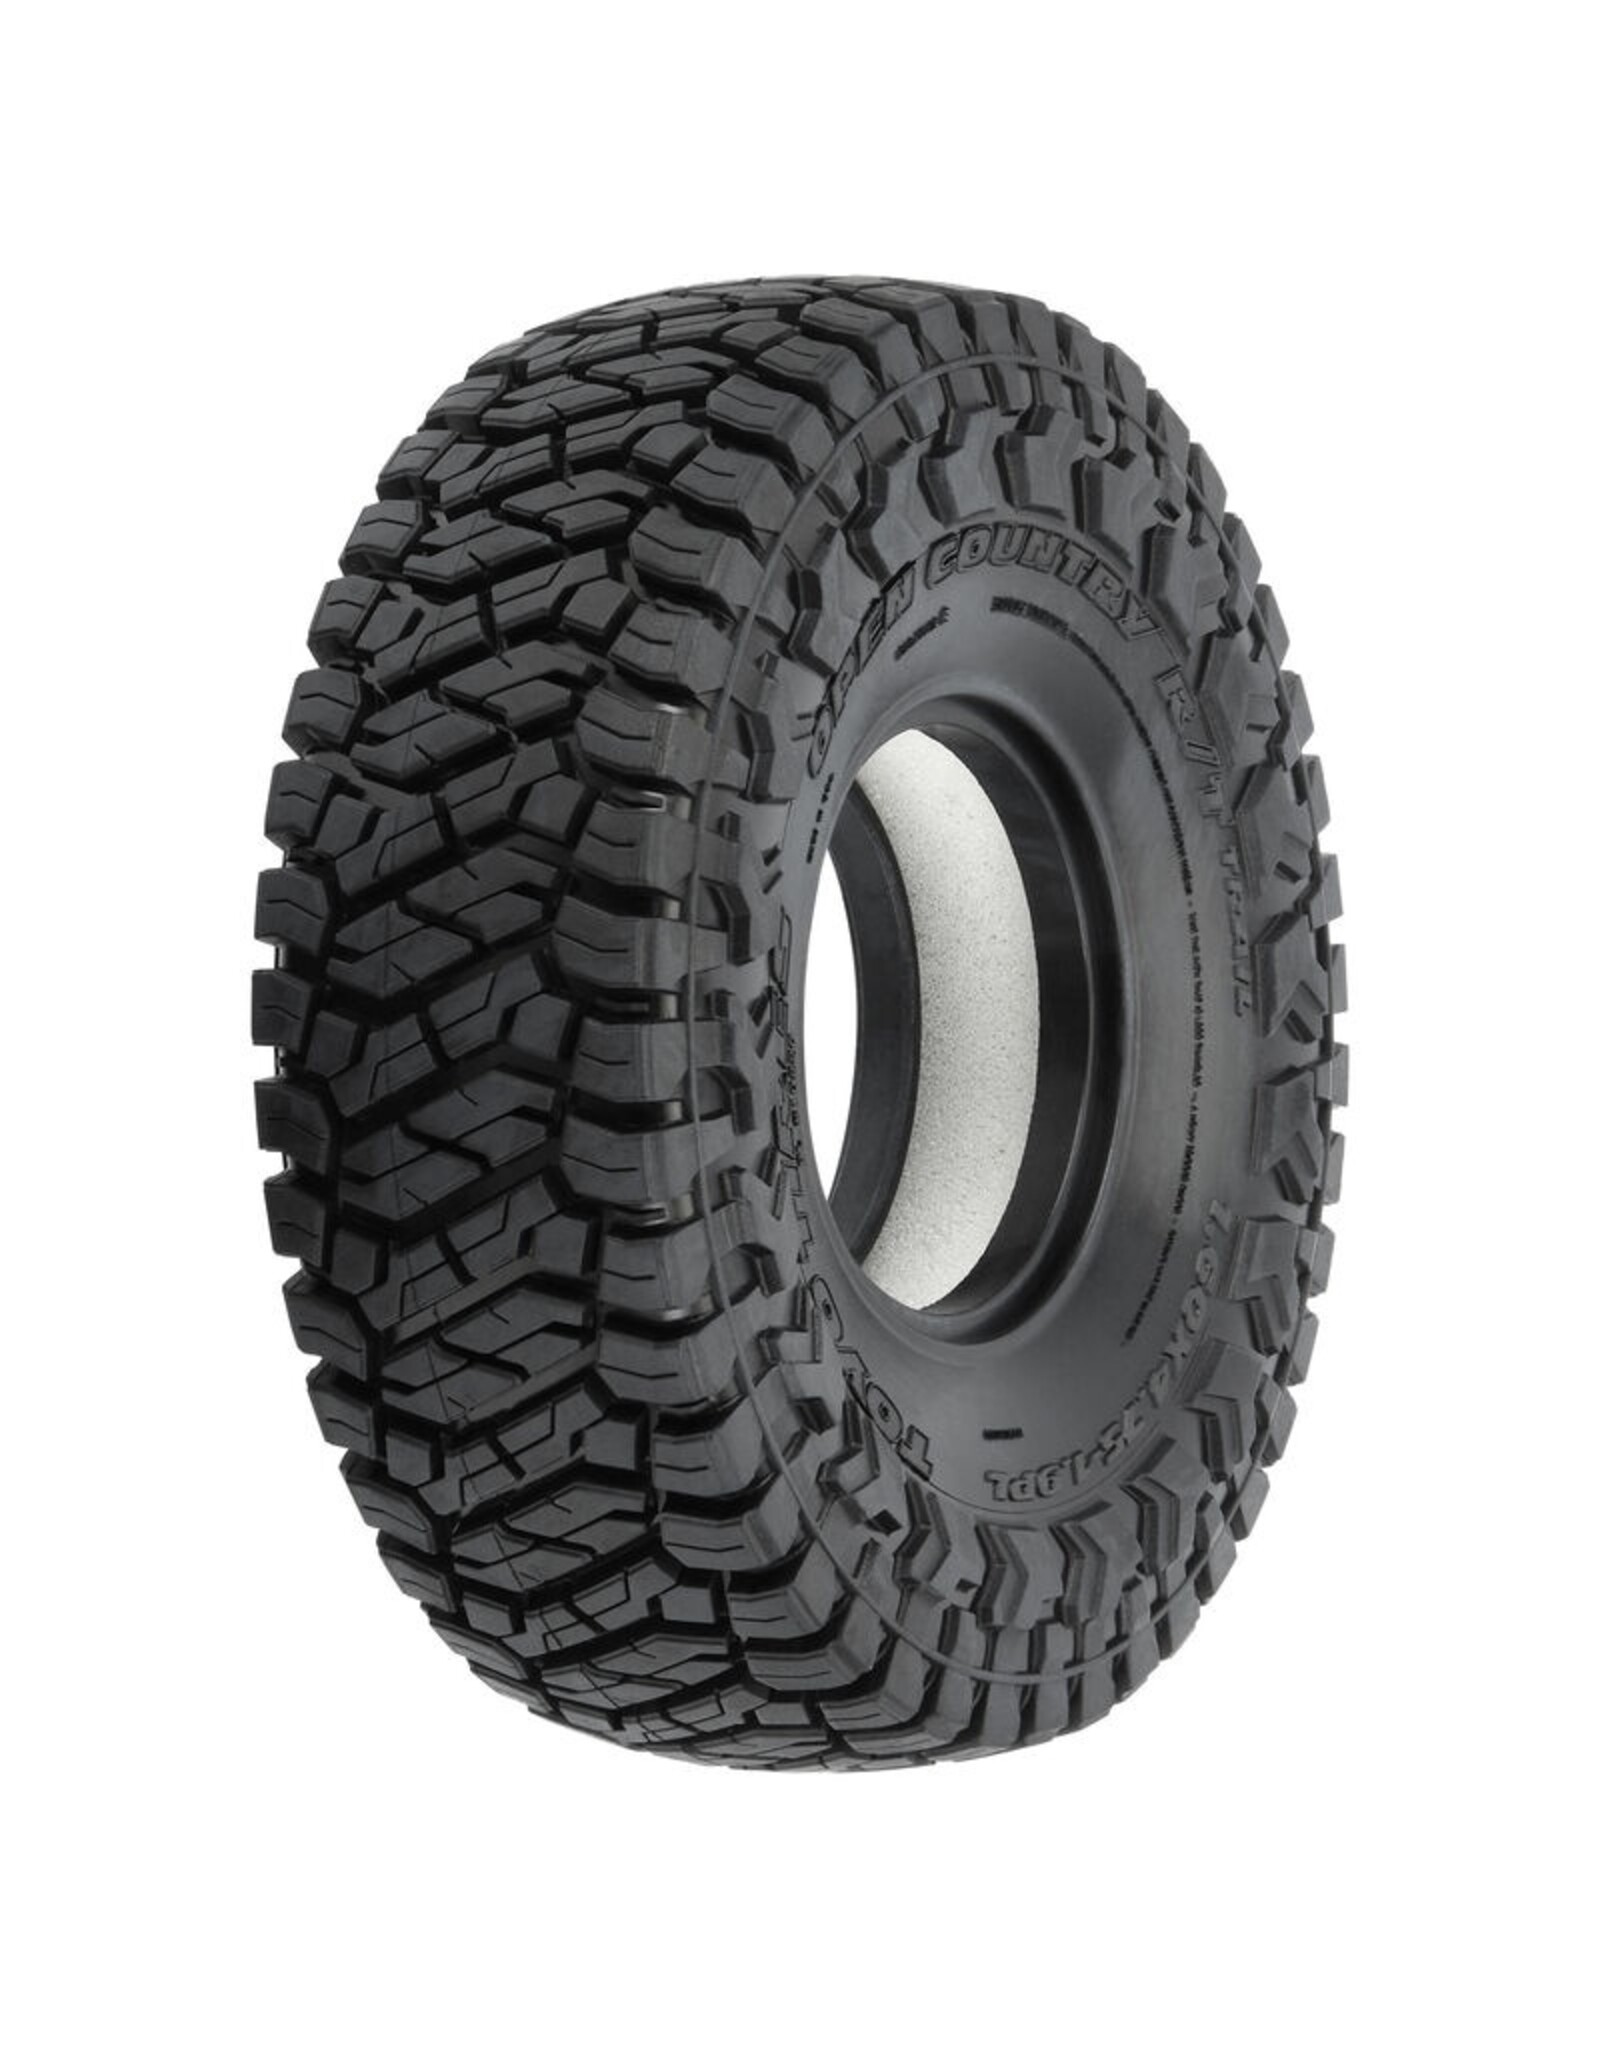 Pro-Line Racing PRO1022614 Toyo Open Country R/T Trail 1.9"" G8 Rock Terrain Truck Tires (2) for Front or Rear